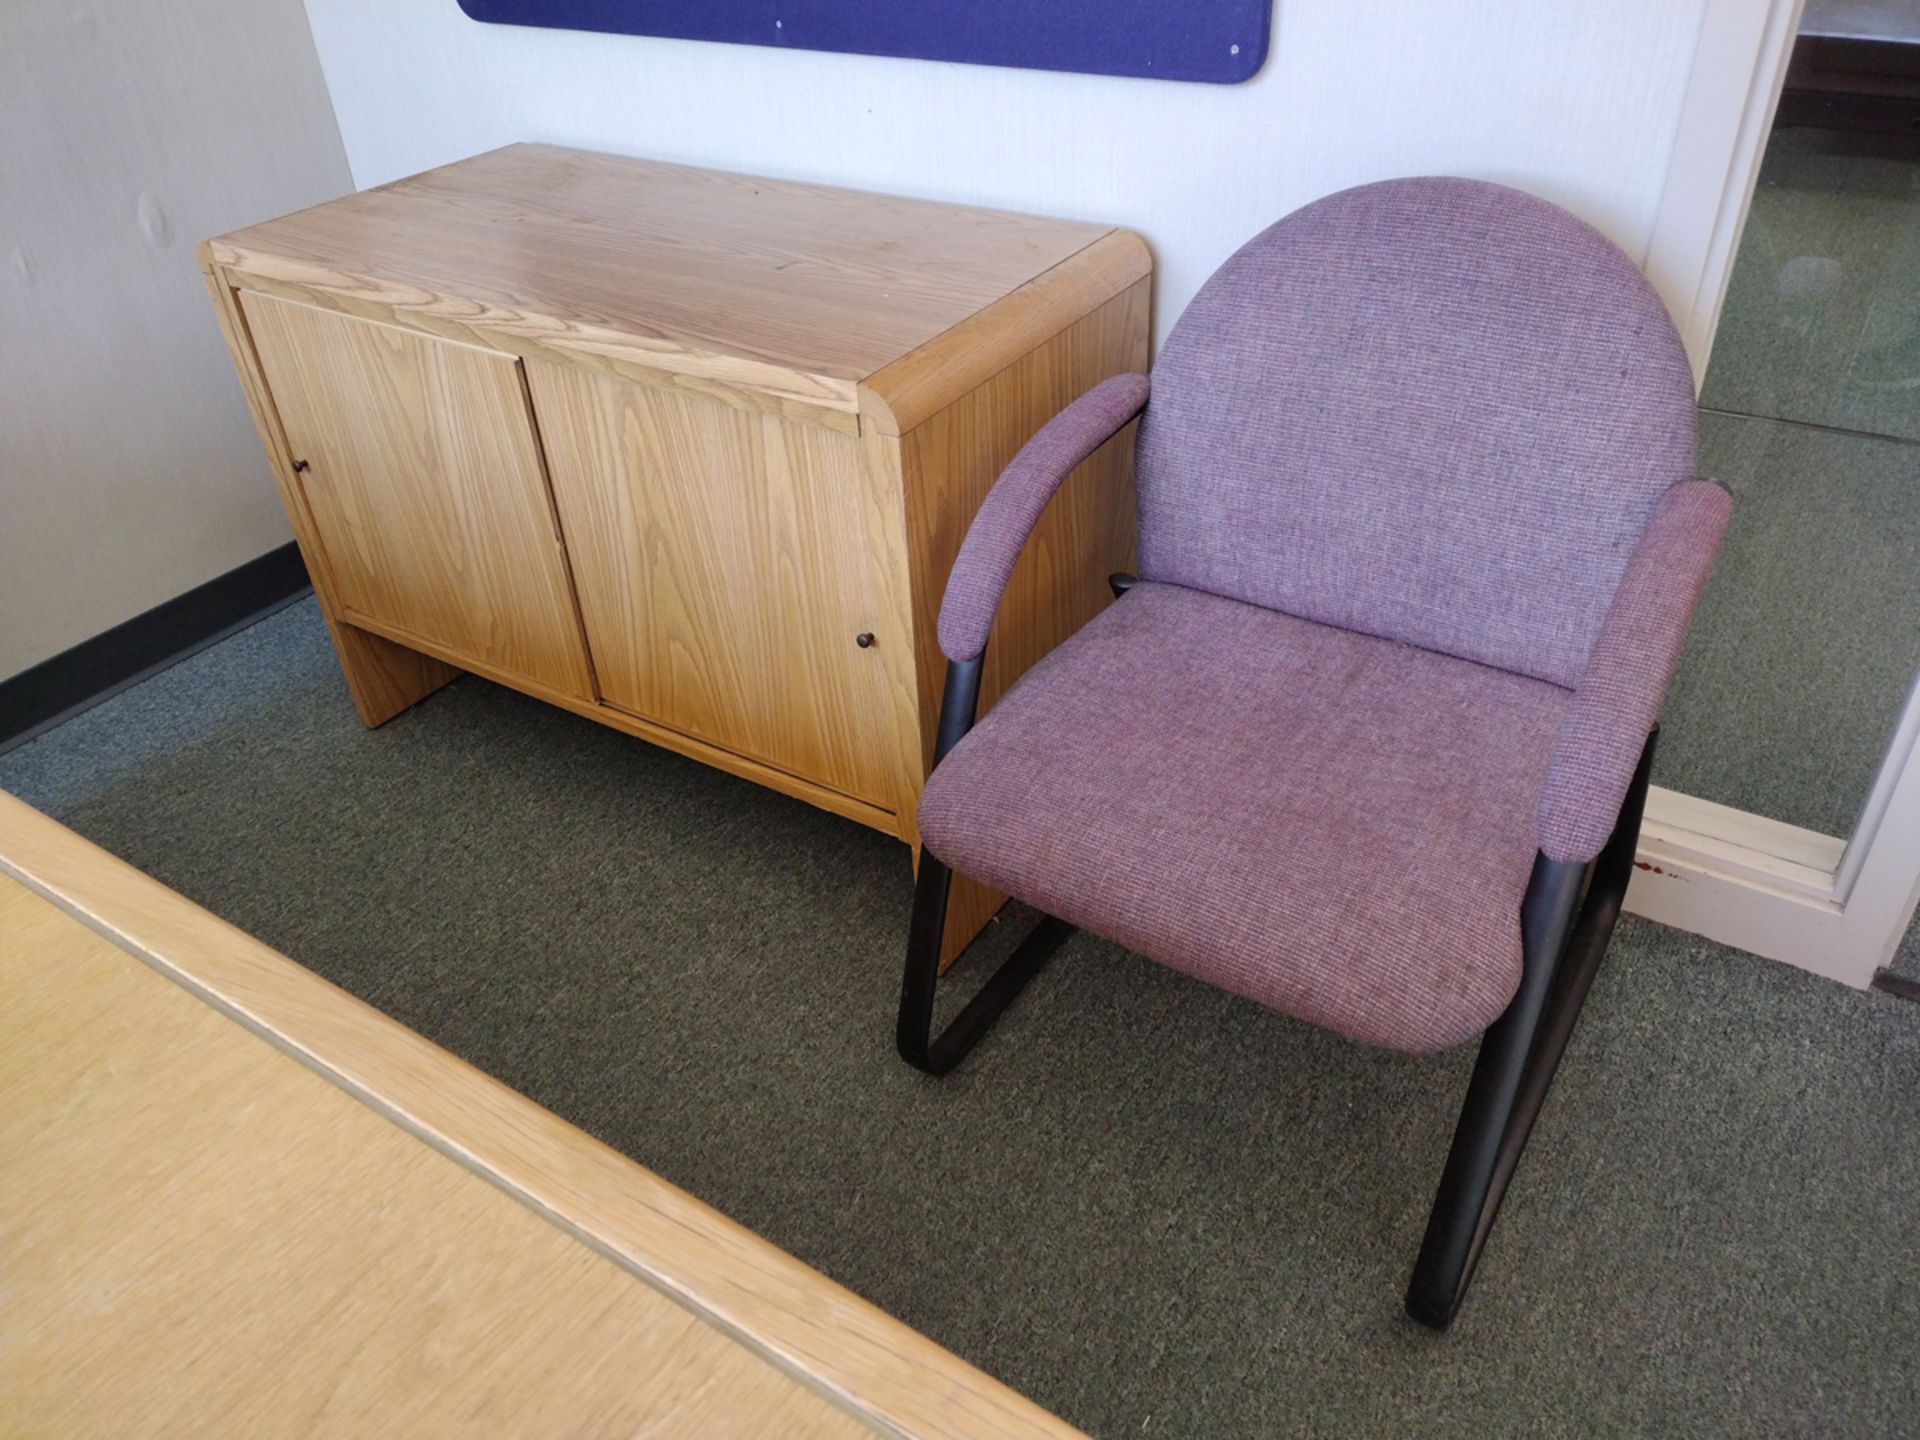 Group of Office Furniture Throughout Rooms - Image 3 of 14